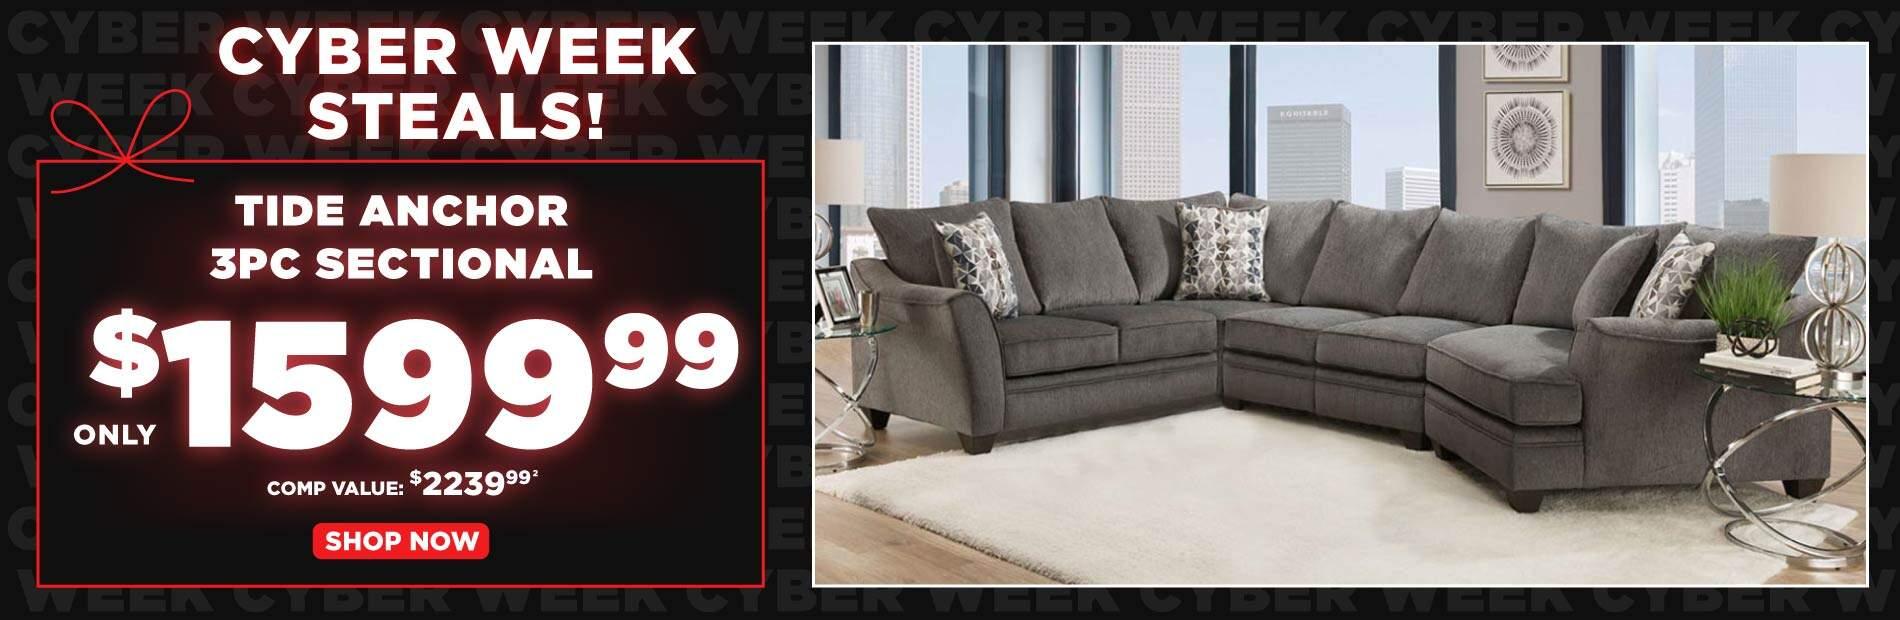 Cyber Week Steals! Tide Anchor 3pc Sectional only $1599.99 comp value $2239.99.2. Shop Now